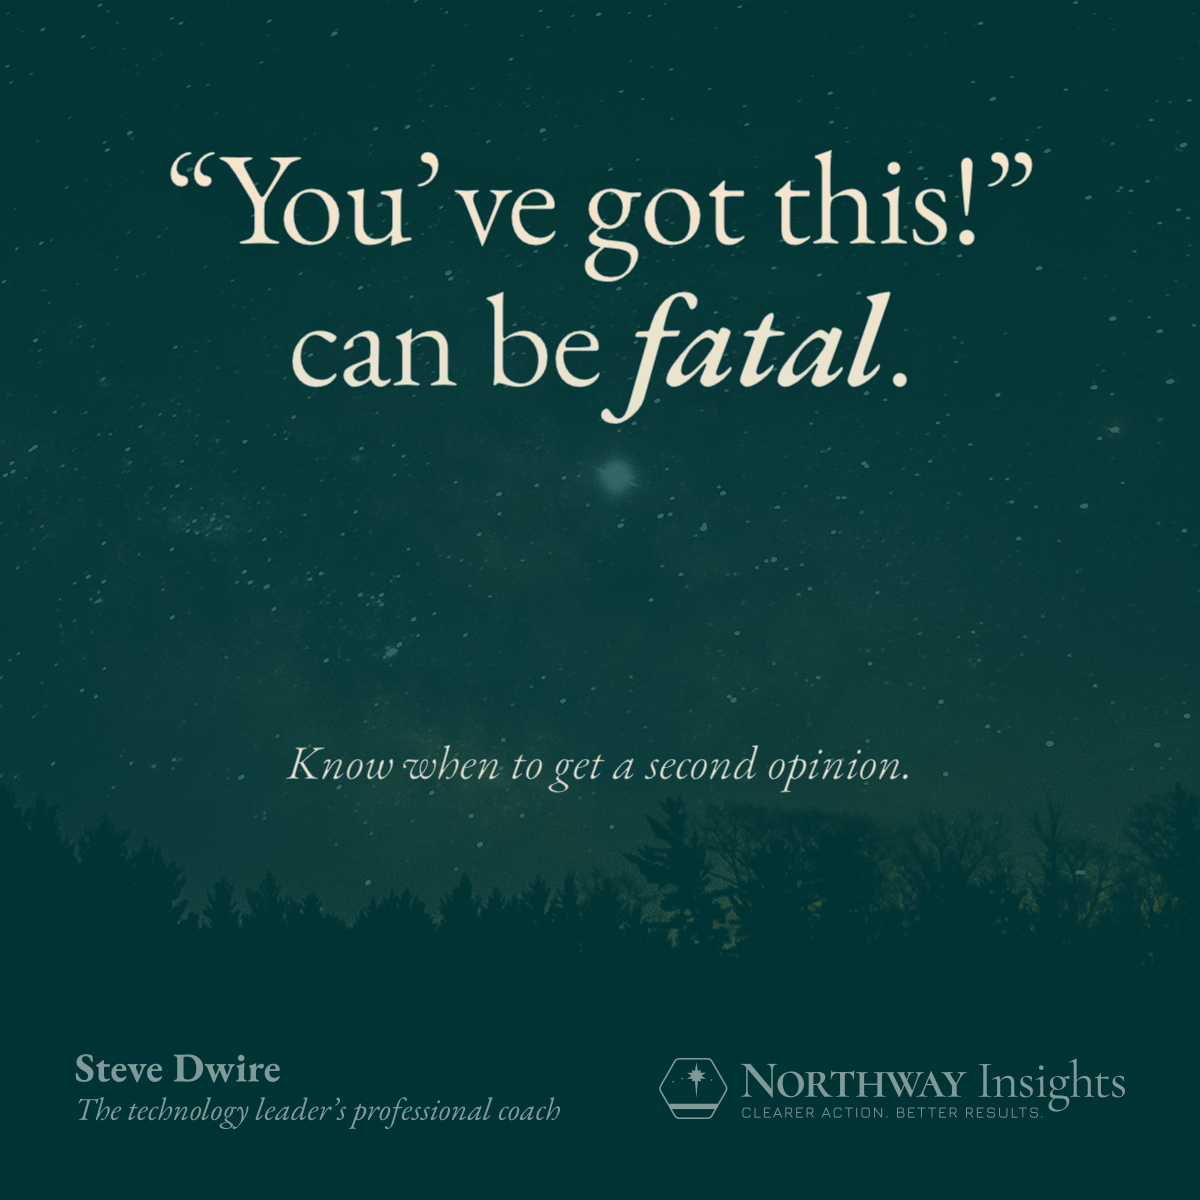 "You've got this!" can be fatal. Know when to get a second opinion.